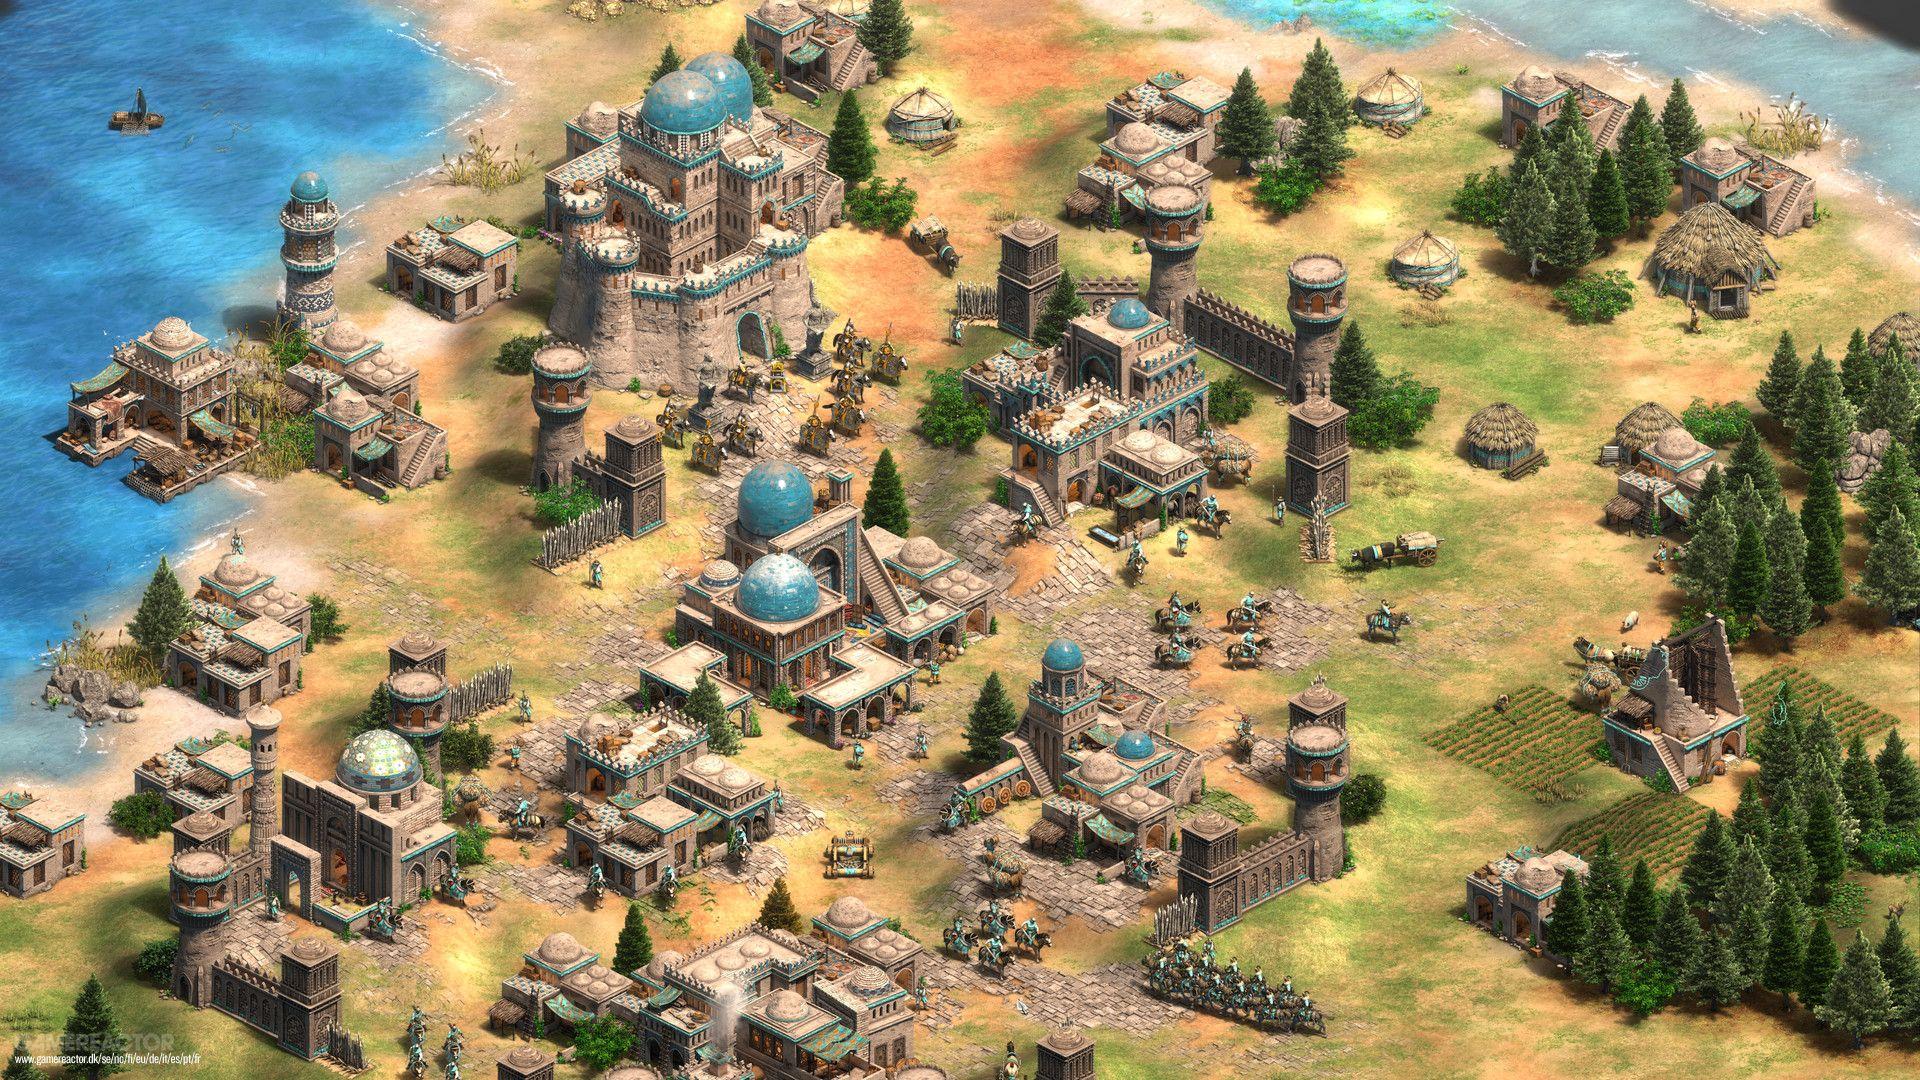 We stayed faithful with Age of Empires II: Definitive Edition